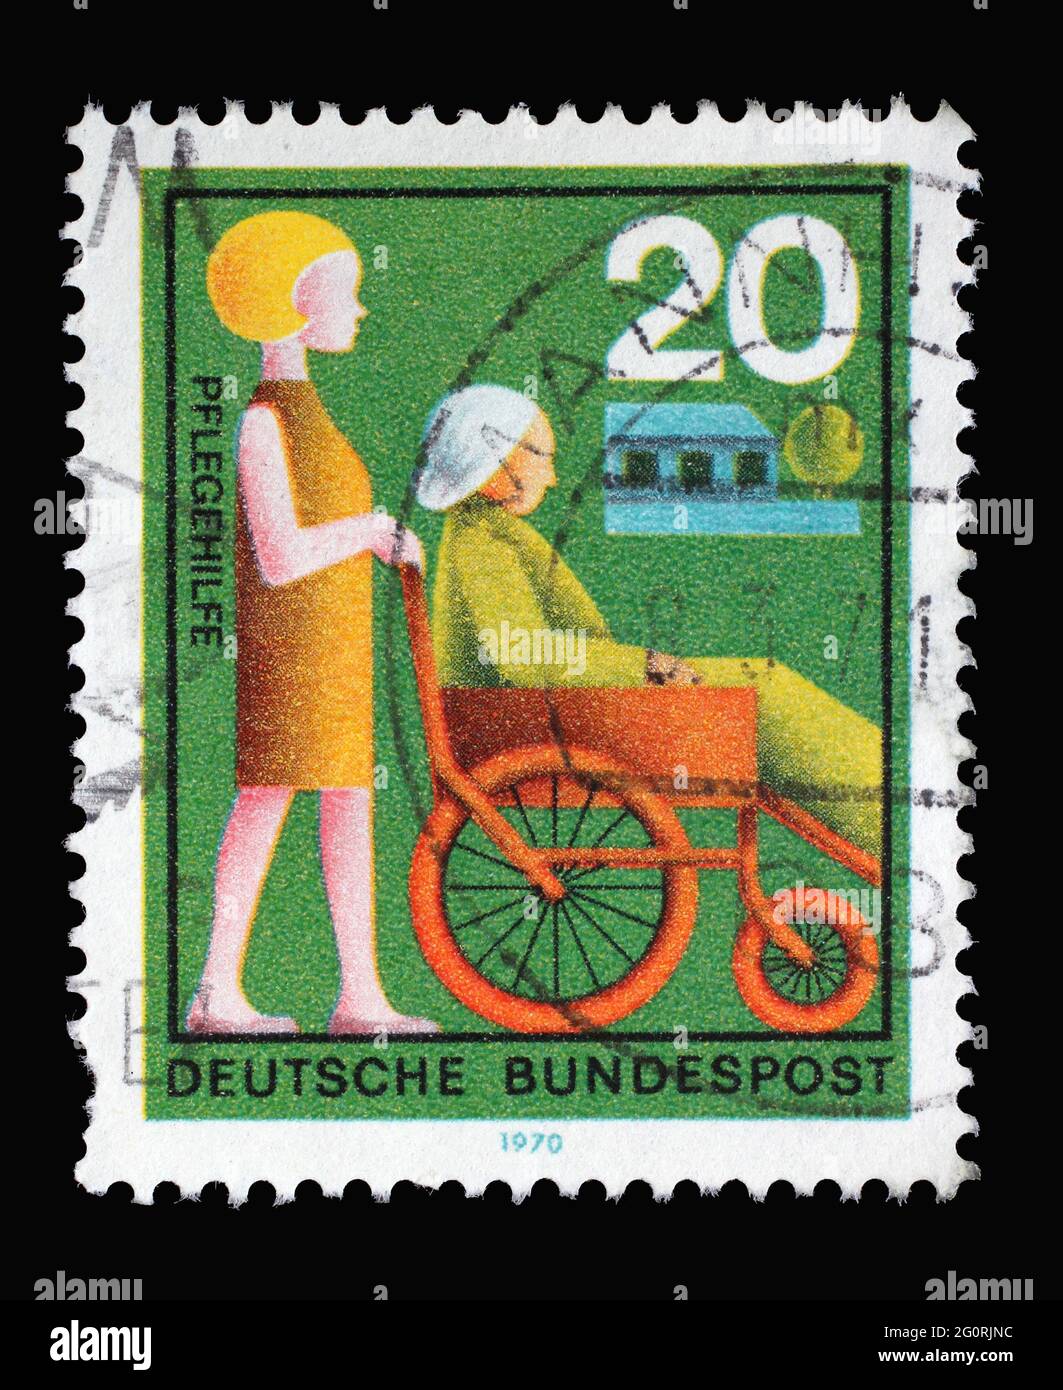 Stamp printed in Germany showing a helper pushes a wheelchair, Volunteer Nursing Aid, circa 1970 Stock Photo